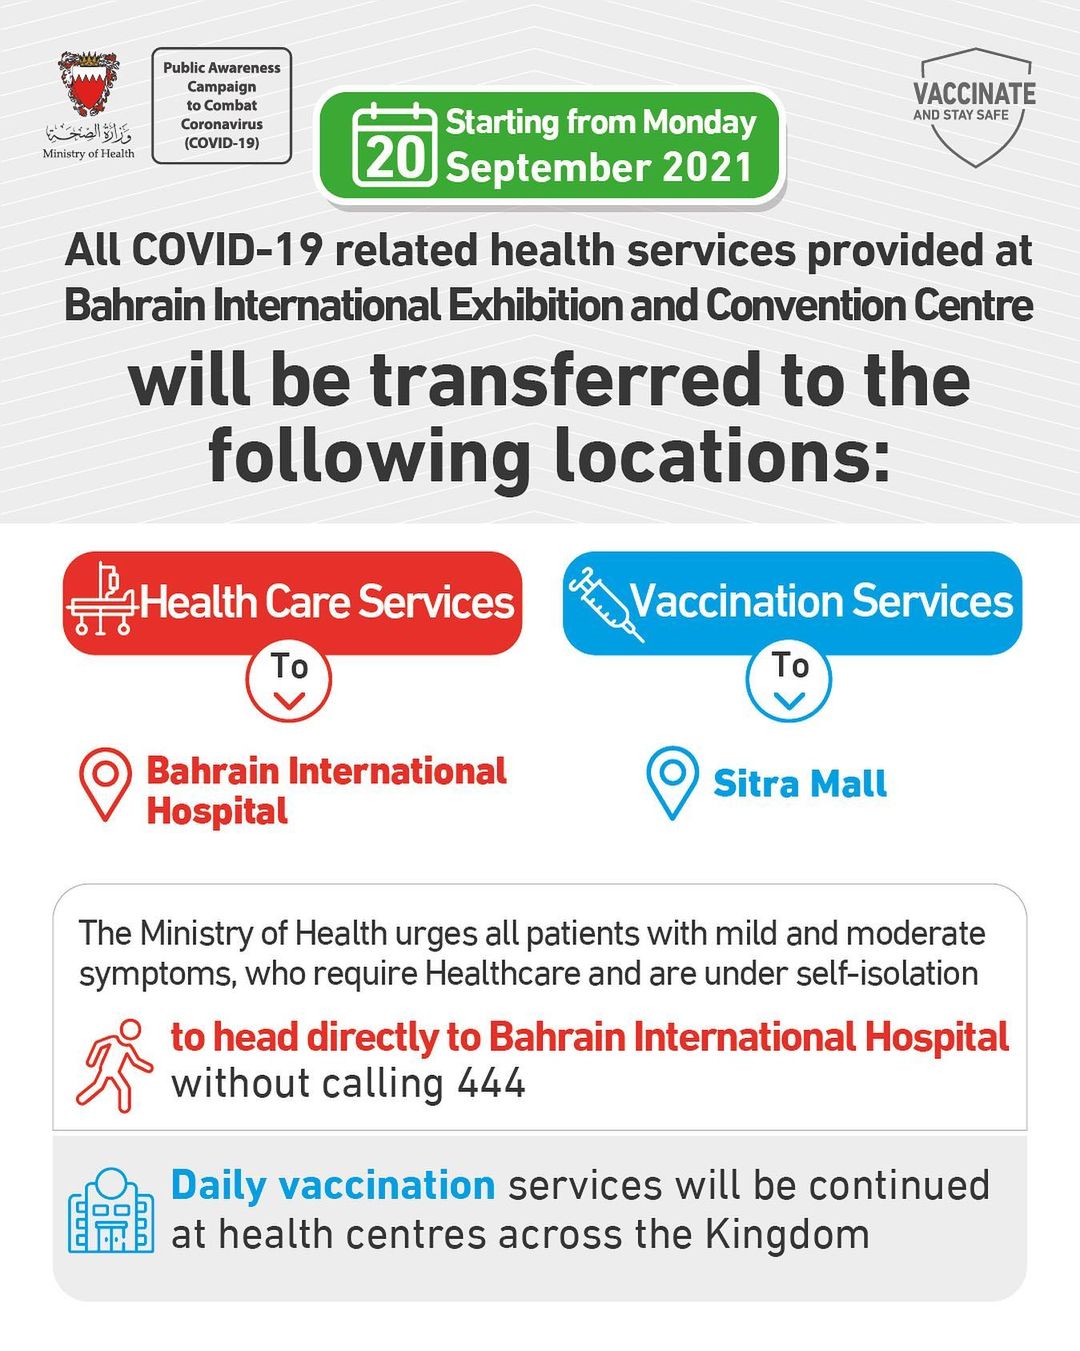 All services provided at the Bahrain International Exhibition and Convention Centre will be transferred to Bahrain International Hospital and Sitra Mall starting Monday, 20 September 2021